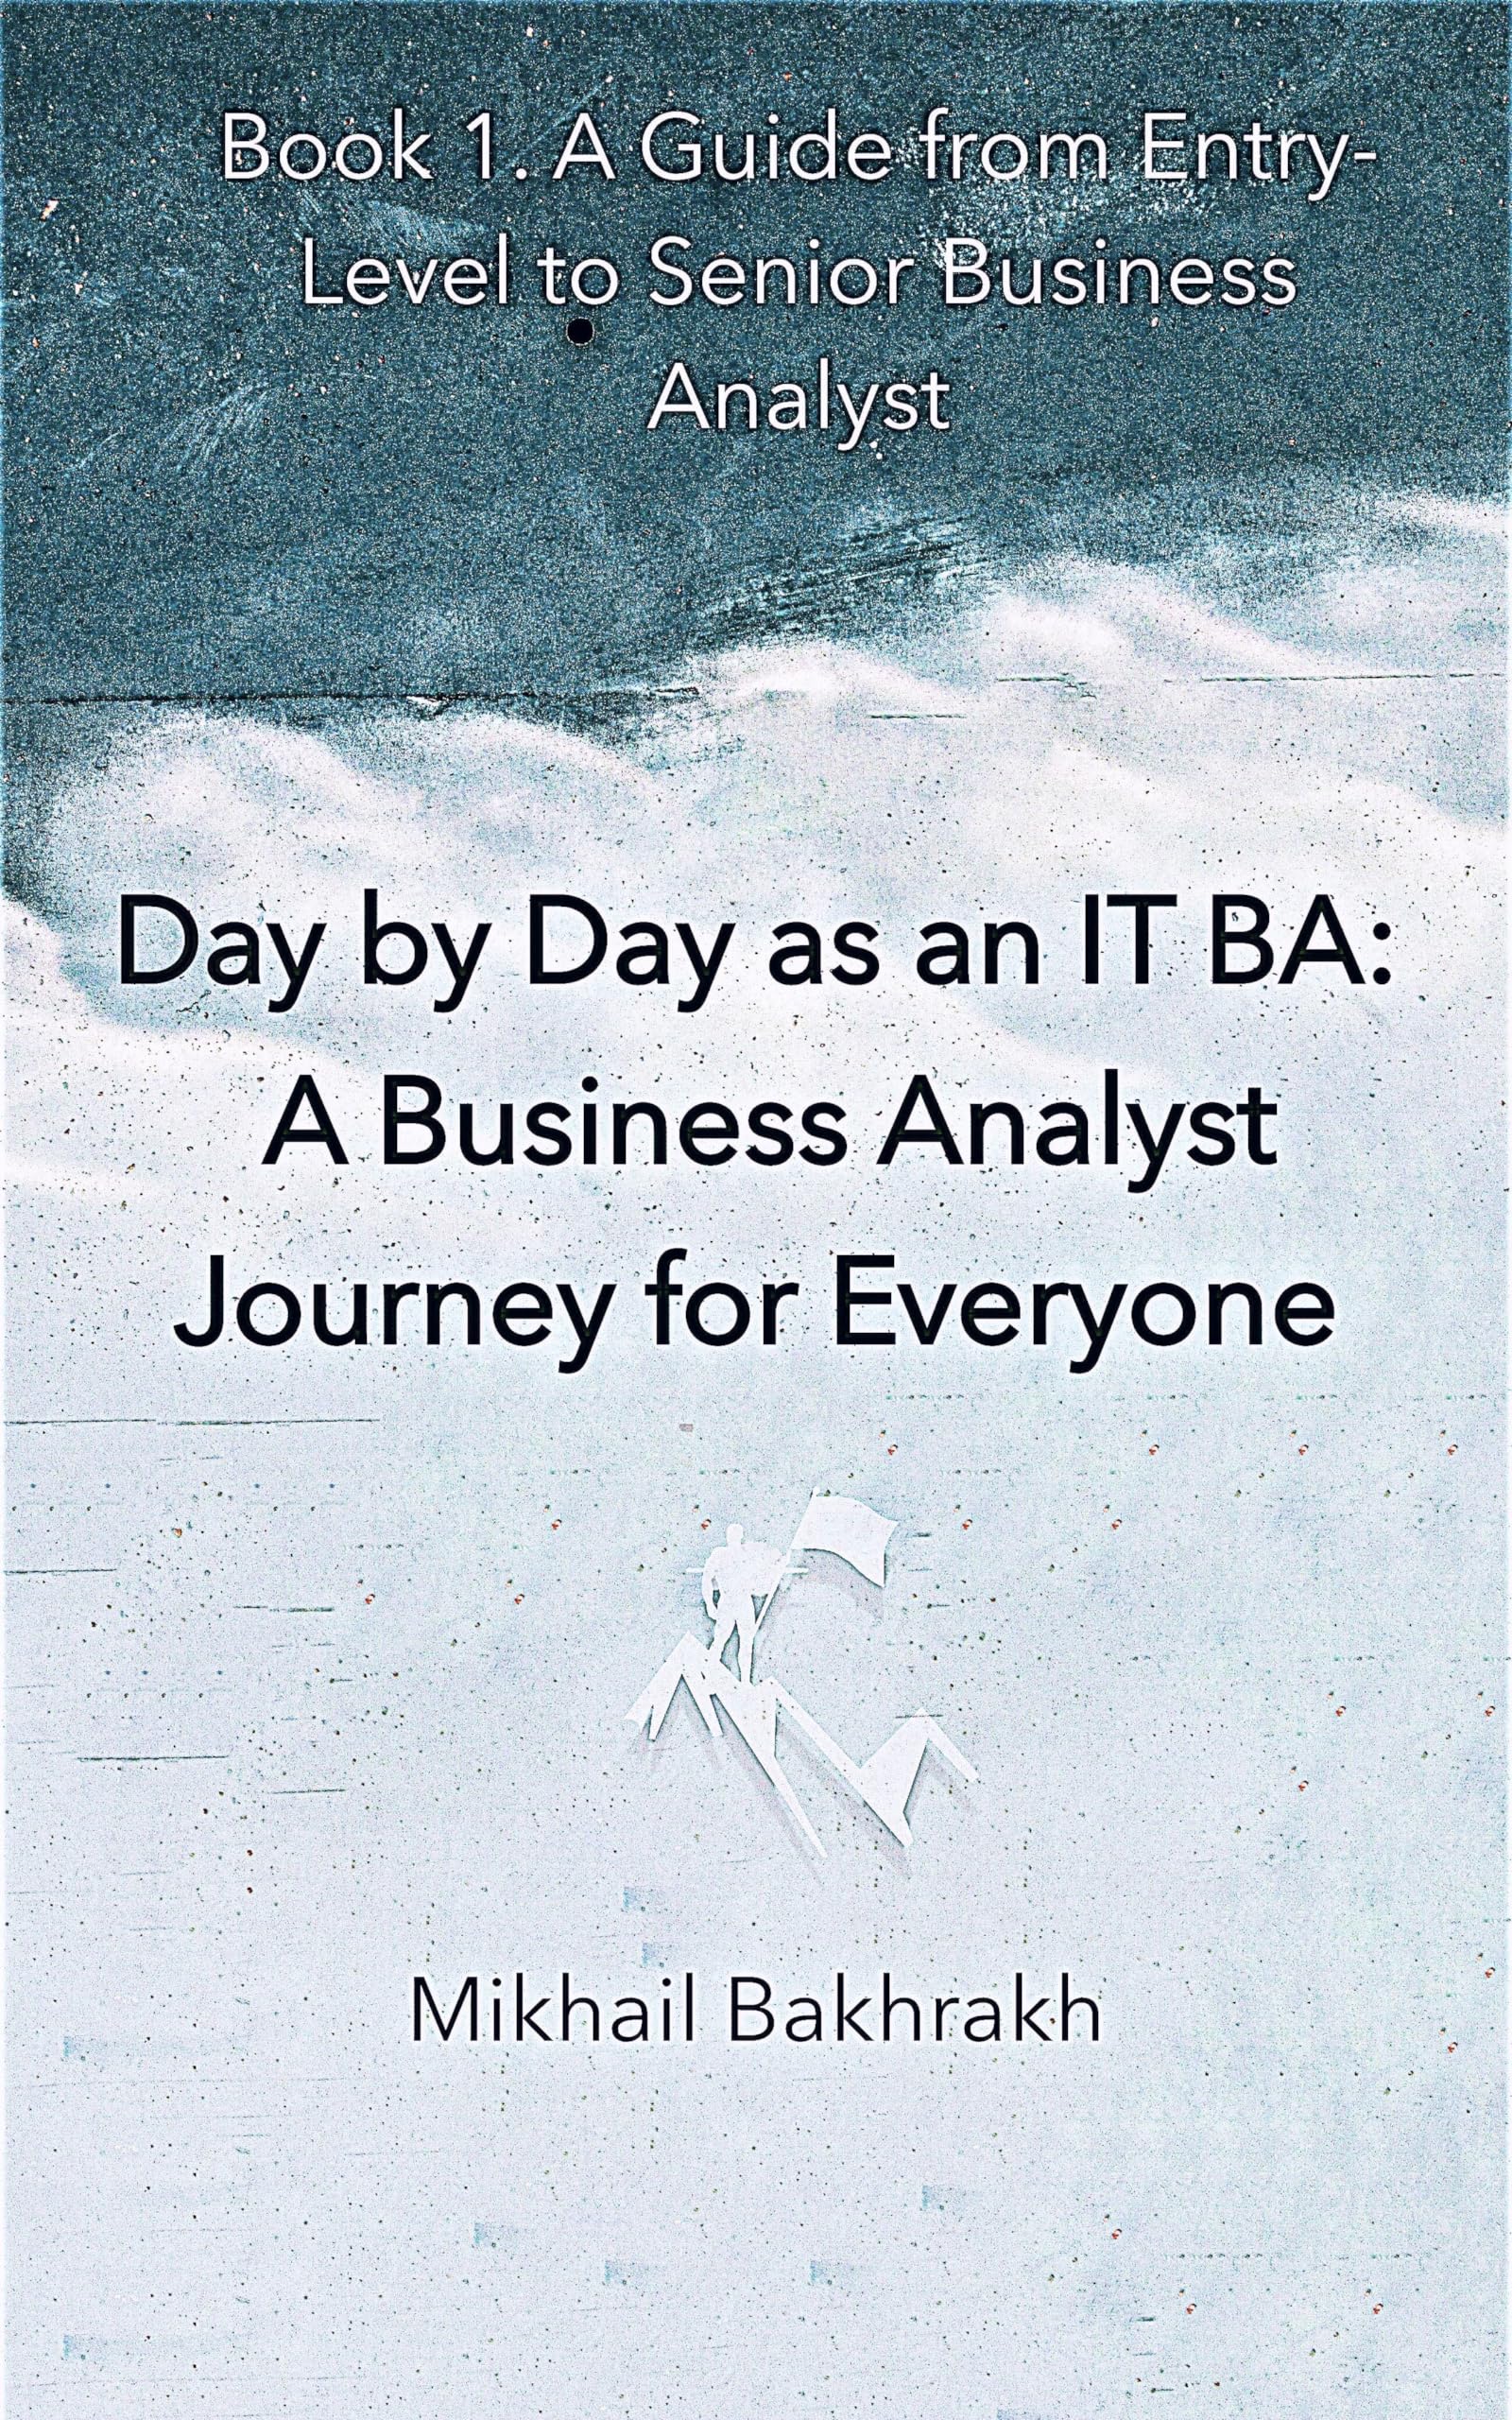 Day by Day as an IT BA: A Business Analyst Journey for Everyone: Book 1. A Guide from Entry-Level to Senior Business Analyst